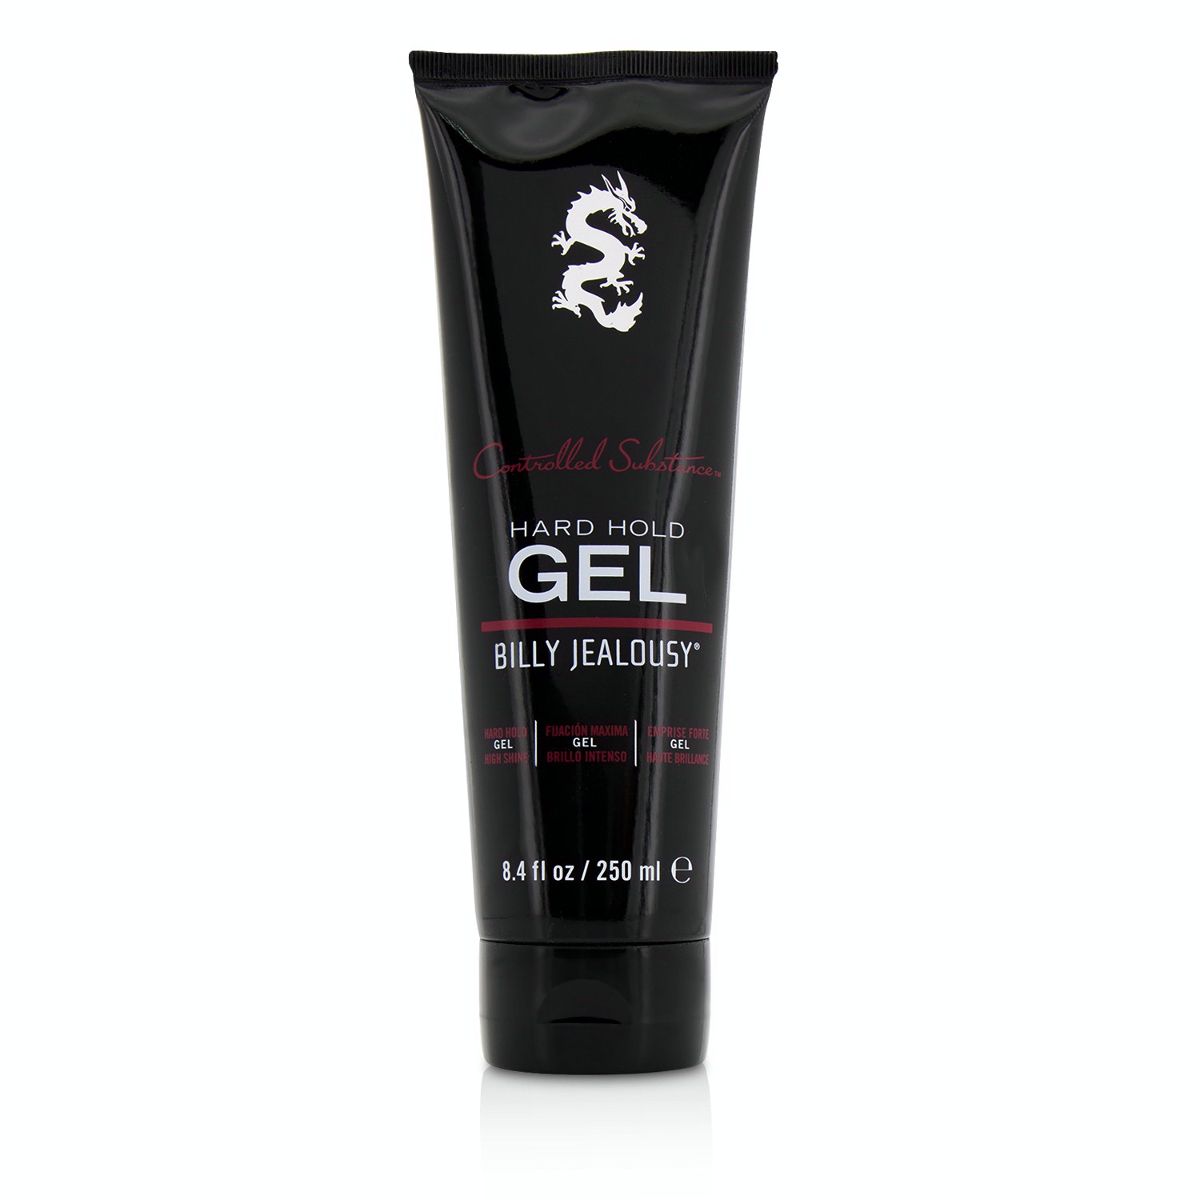 Controlled Substance Hard Hold Gel (High Shine) Billy Jealousy Image